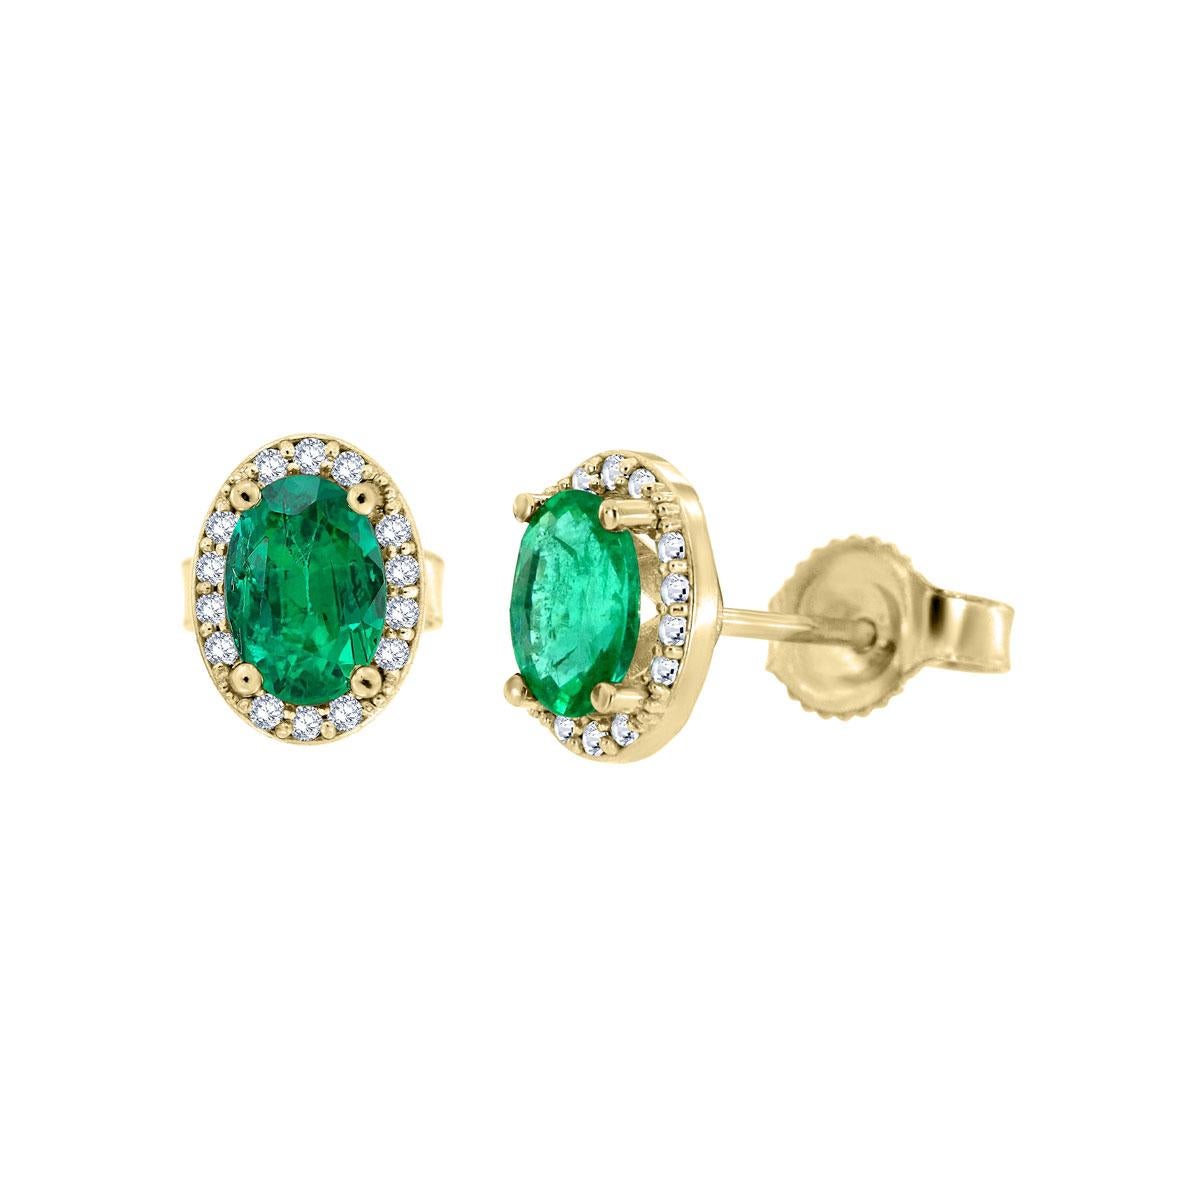 These classic stud earrings feature a 0.80-carat total weight of Oval Shape Green Emerald in Exceptional quality surrounded by a halo of full-cut diamonds

Product details: 

Center Gemstone Type: Emerald
Center Gemstone Carat Weight: 0.83
Center